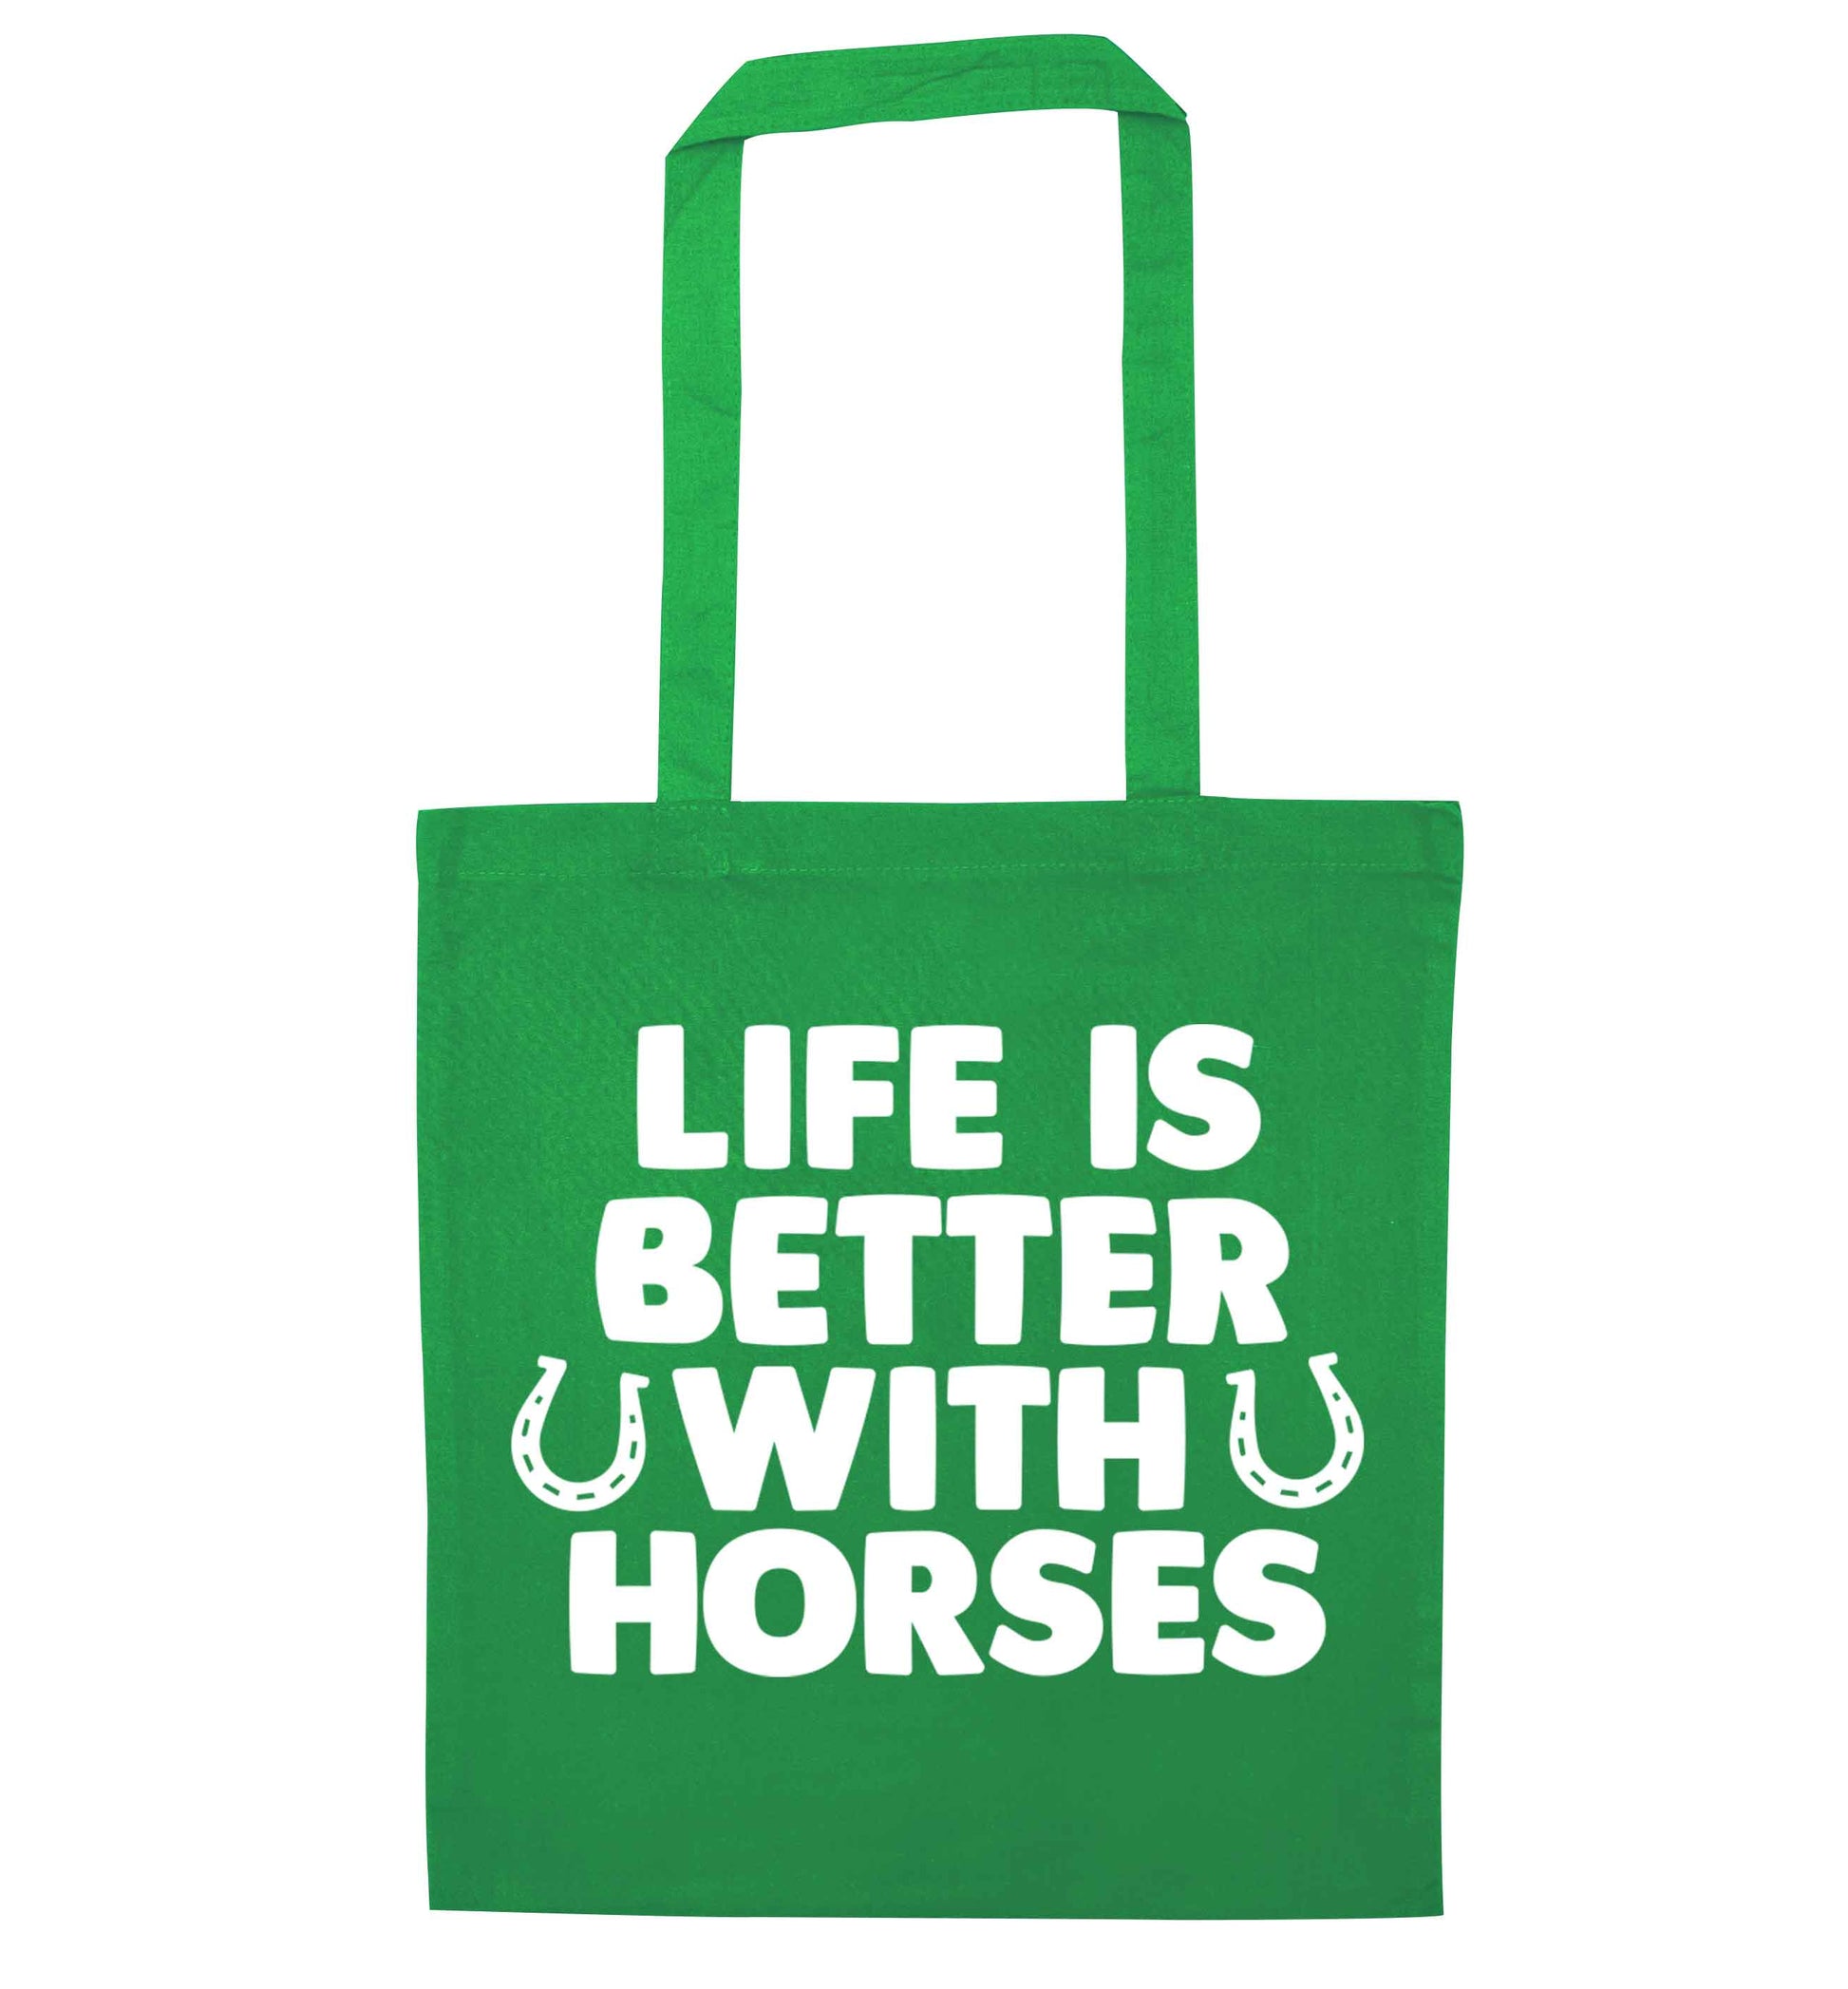 Life is better with horses green tote bag